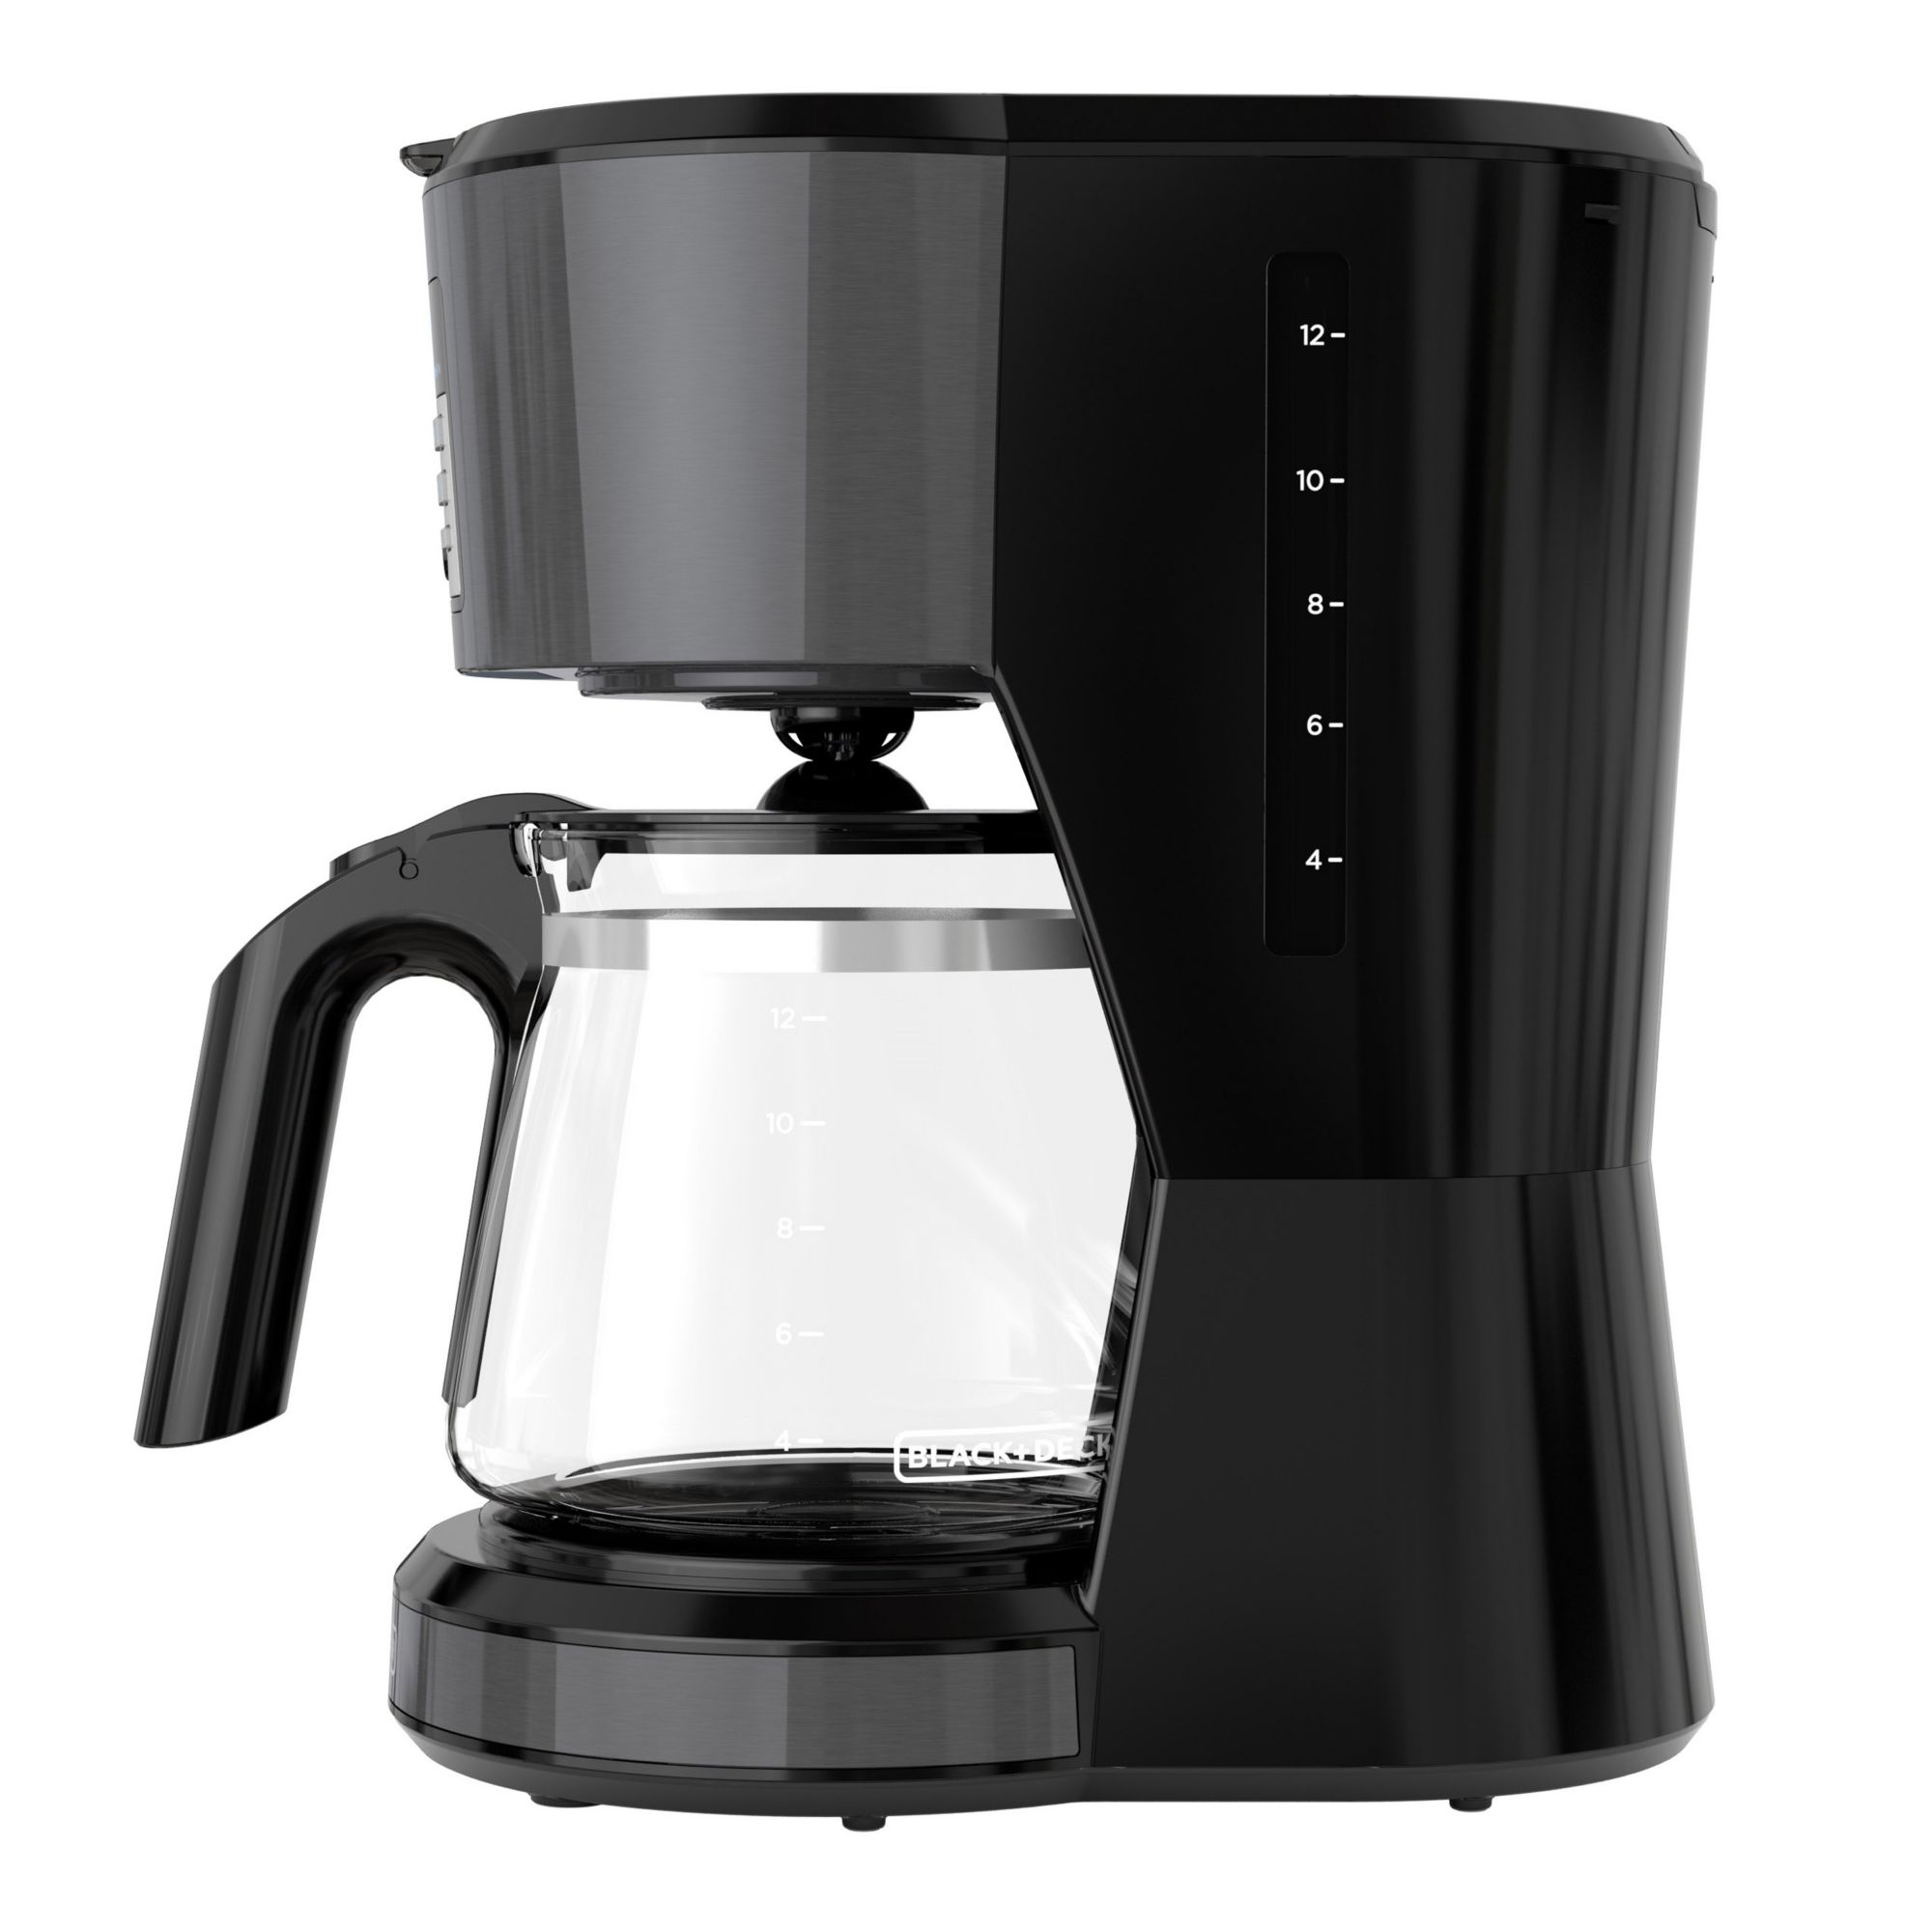 New BLACK+DECKER MILL & BREW 12 CUPS PROGRAMMABLE COFFEE MAKER WITH BU -  general for sale - by owner - craigslist